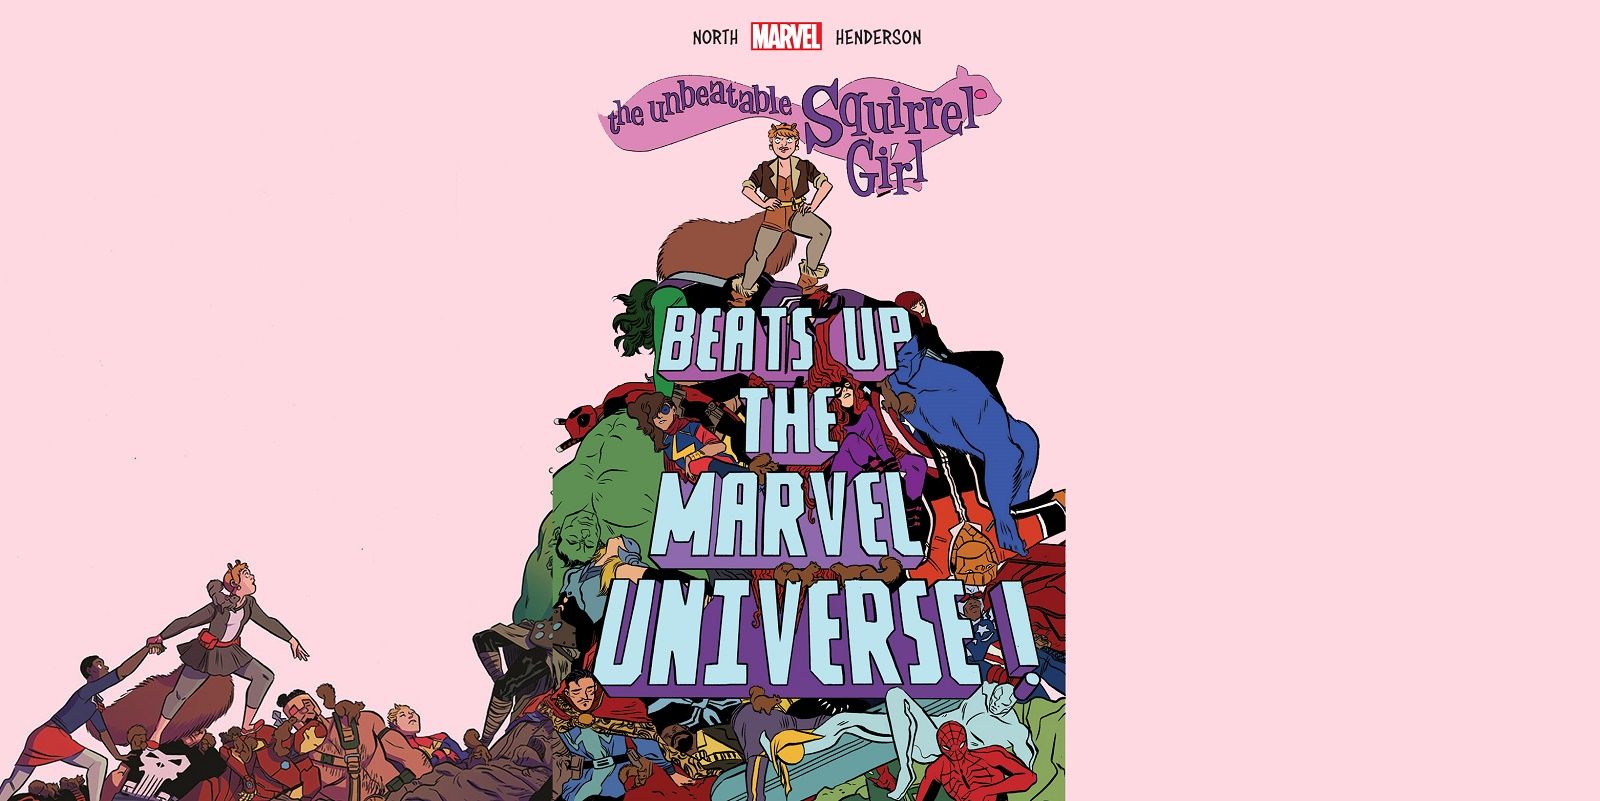 Squirrel Girl Beats Up the Marvel Universe: The Trailer